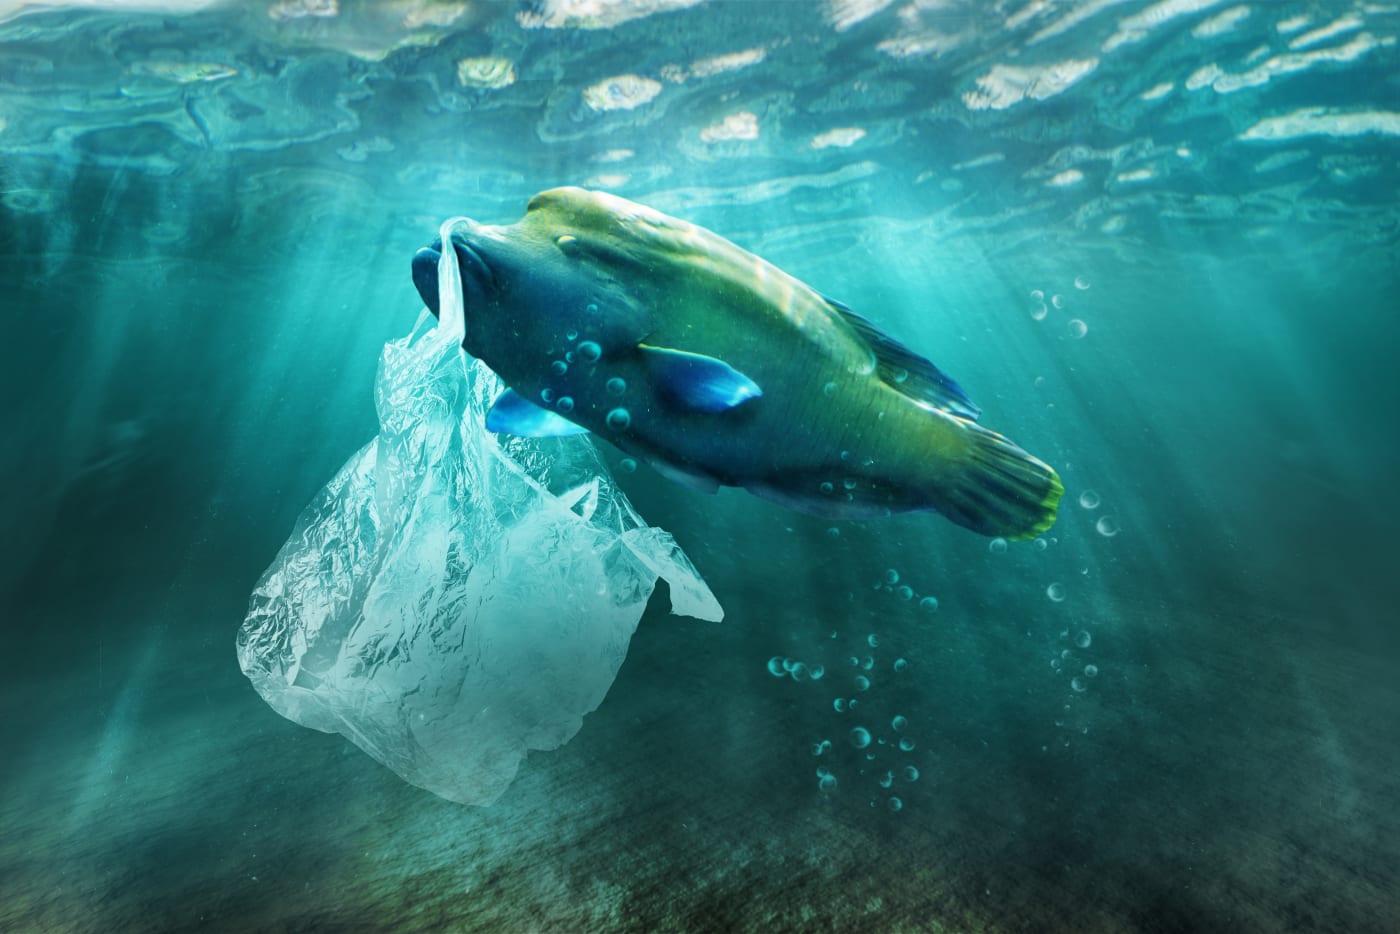 Digitally altered illustration of a humphead wrasse and a plastic bag